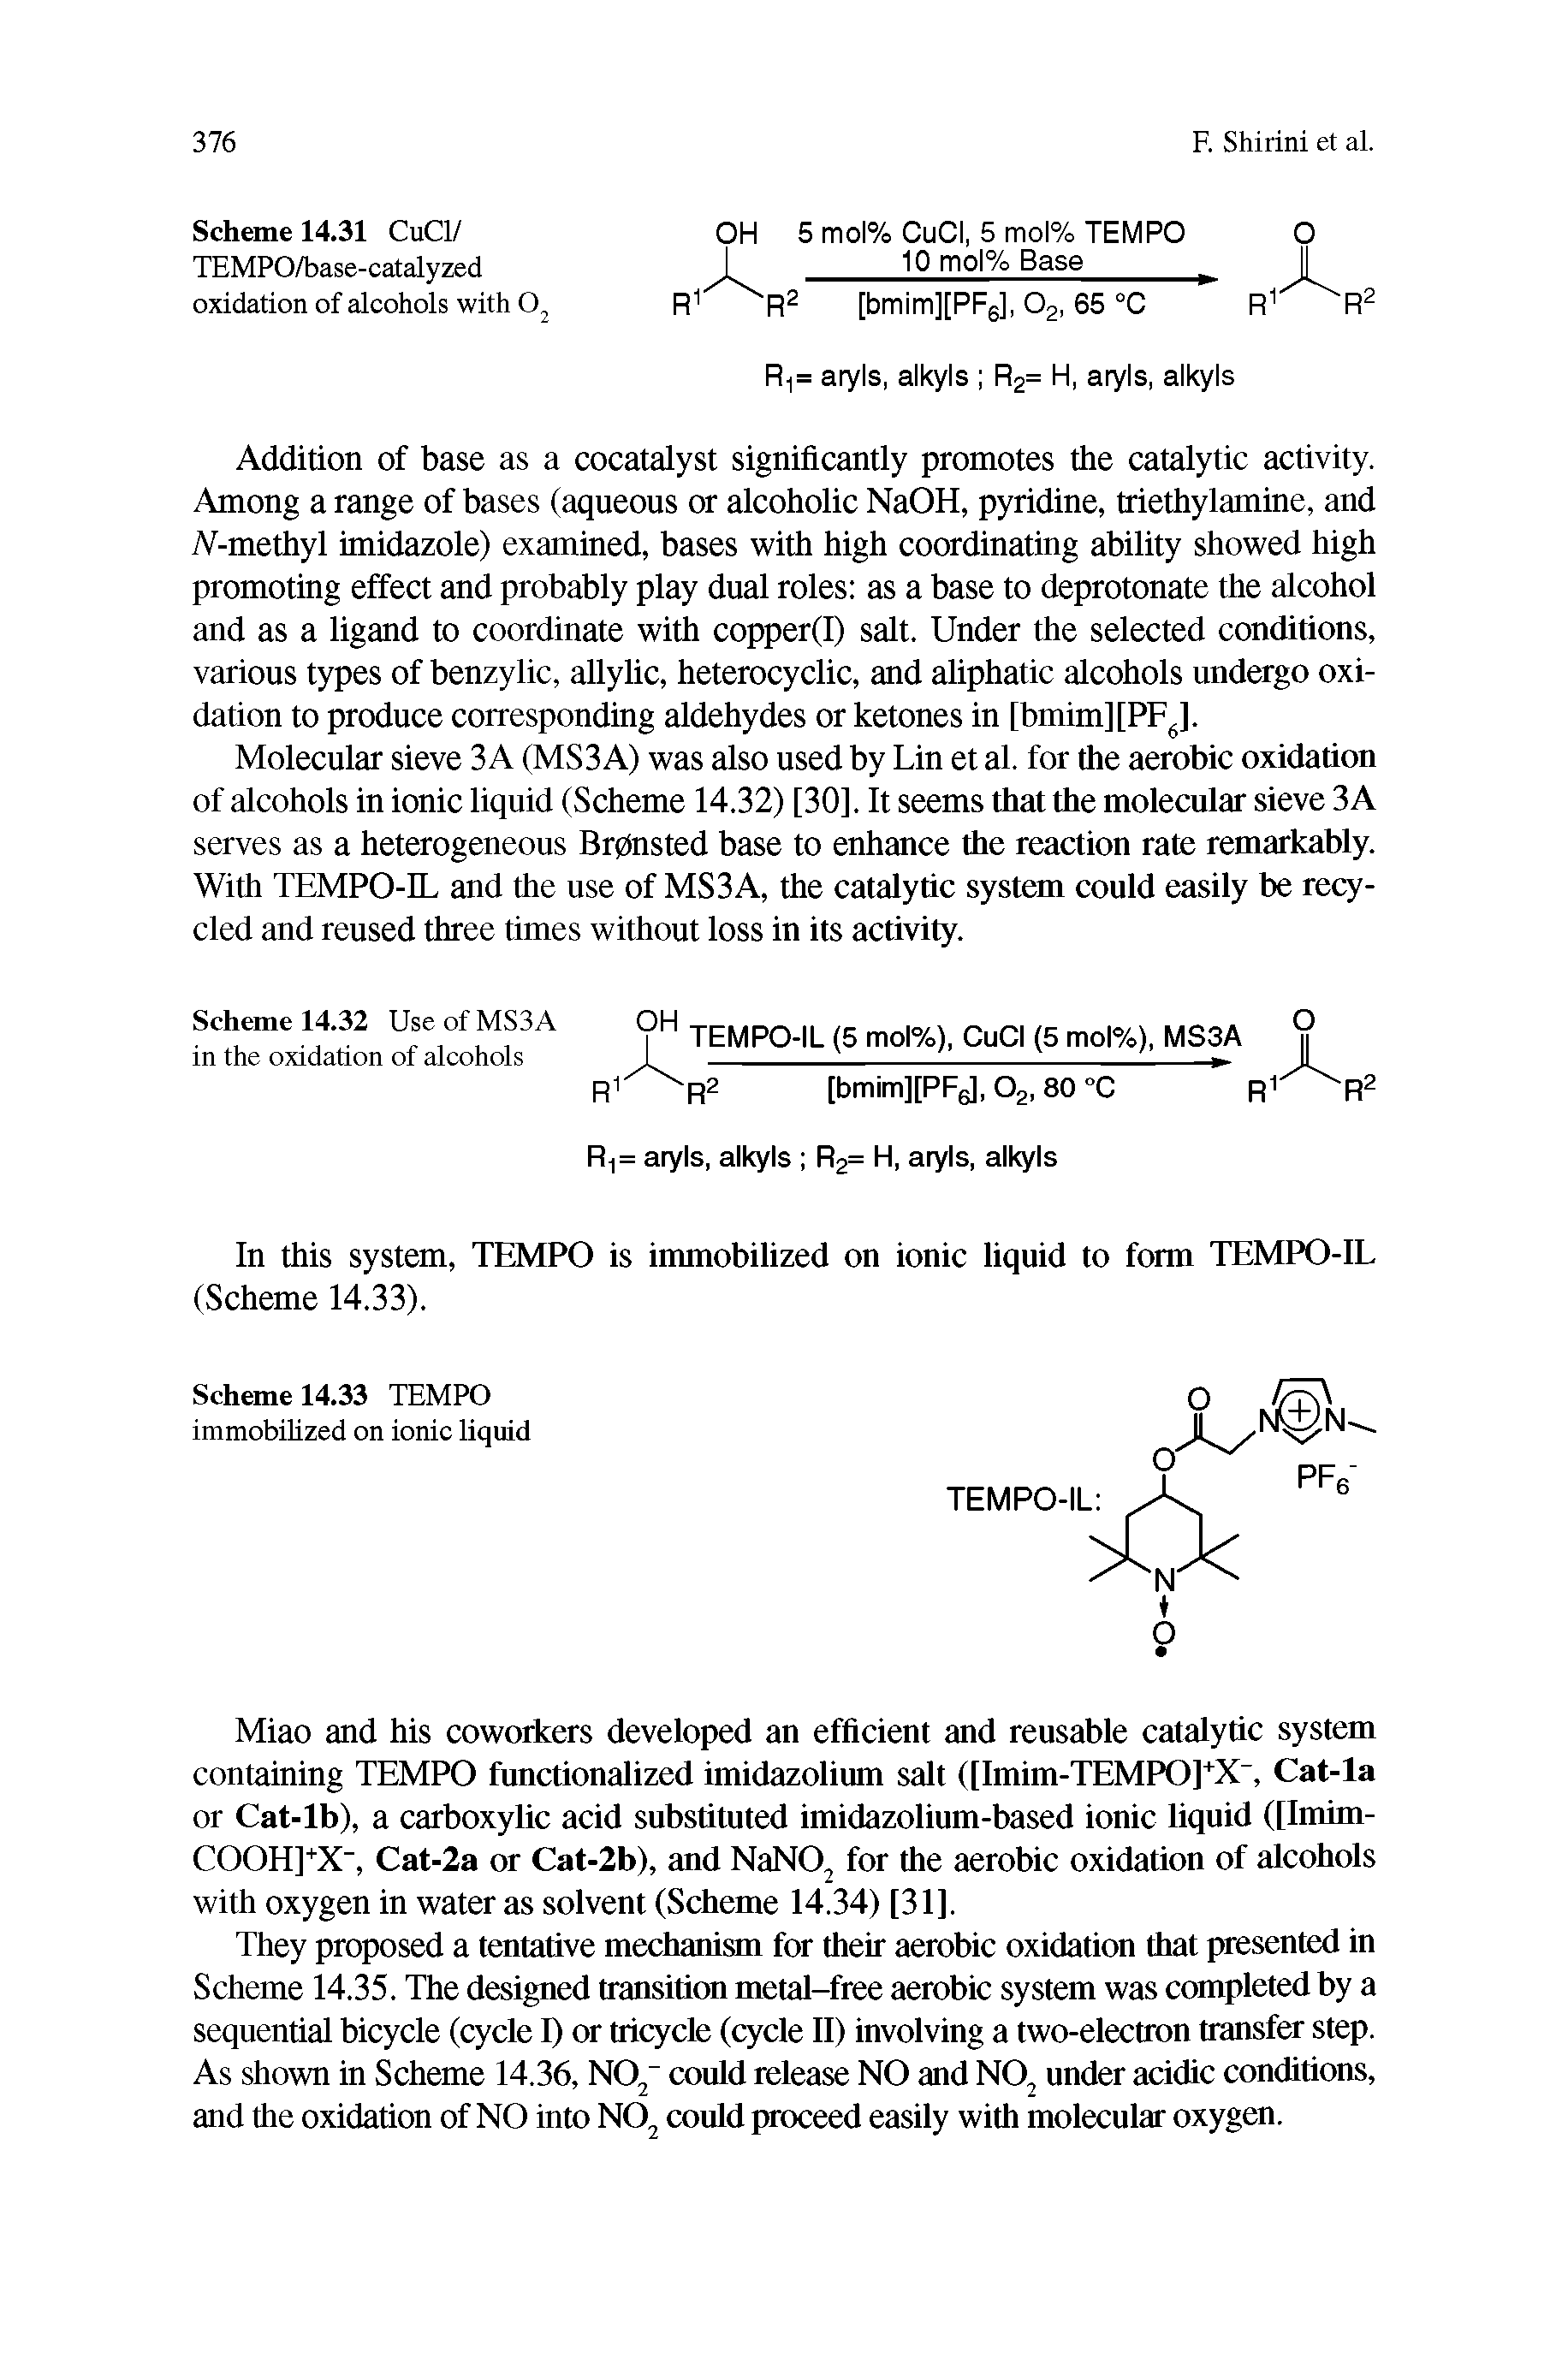 Scheme 14.31 CuCl/ TEMPO/base-catalyzed oxidation of alcohols with O,...